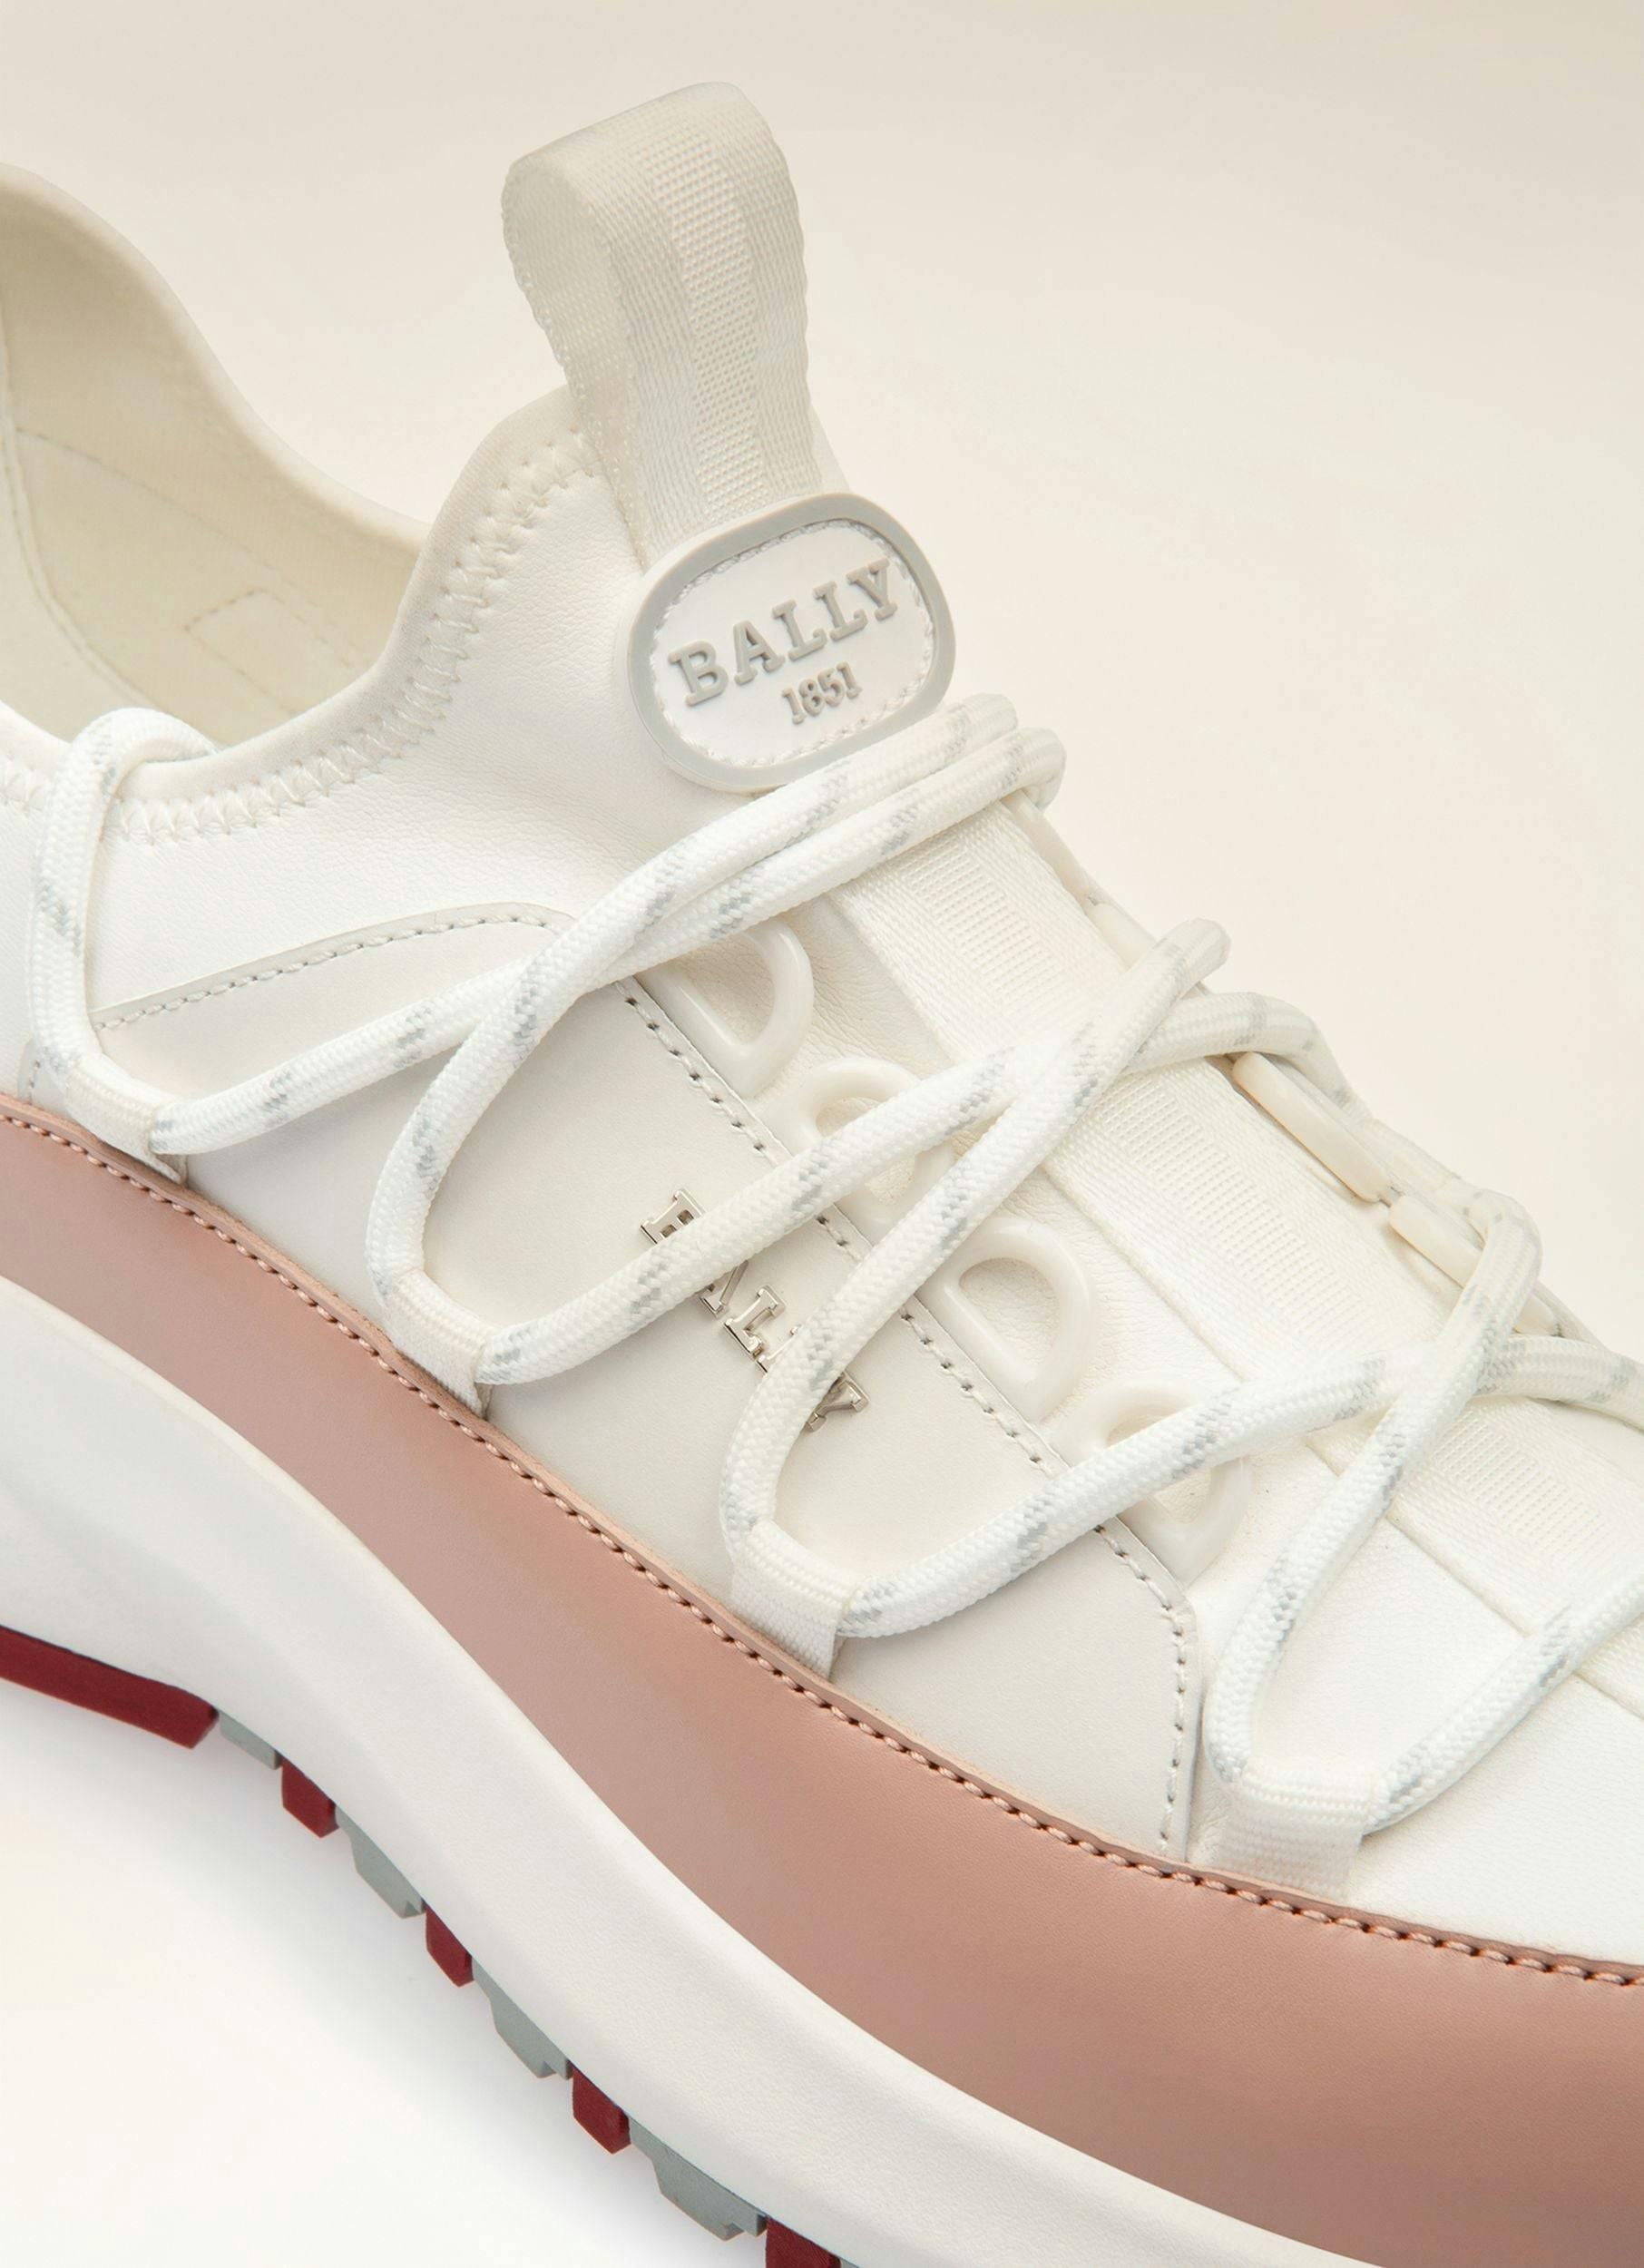 OUTLINE Leather Sneakers In White & Pink - Women's - Bally - 02